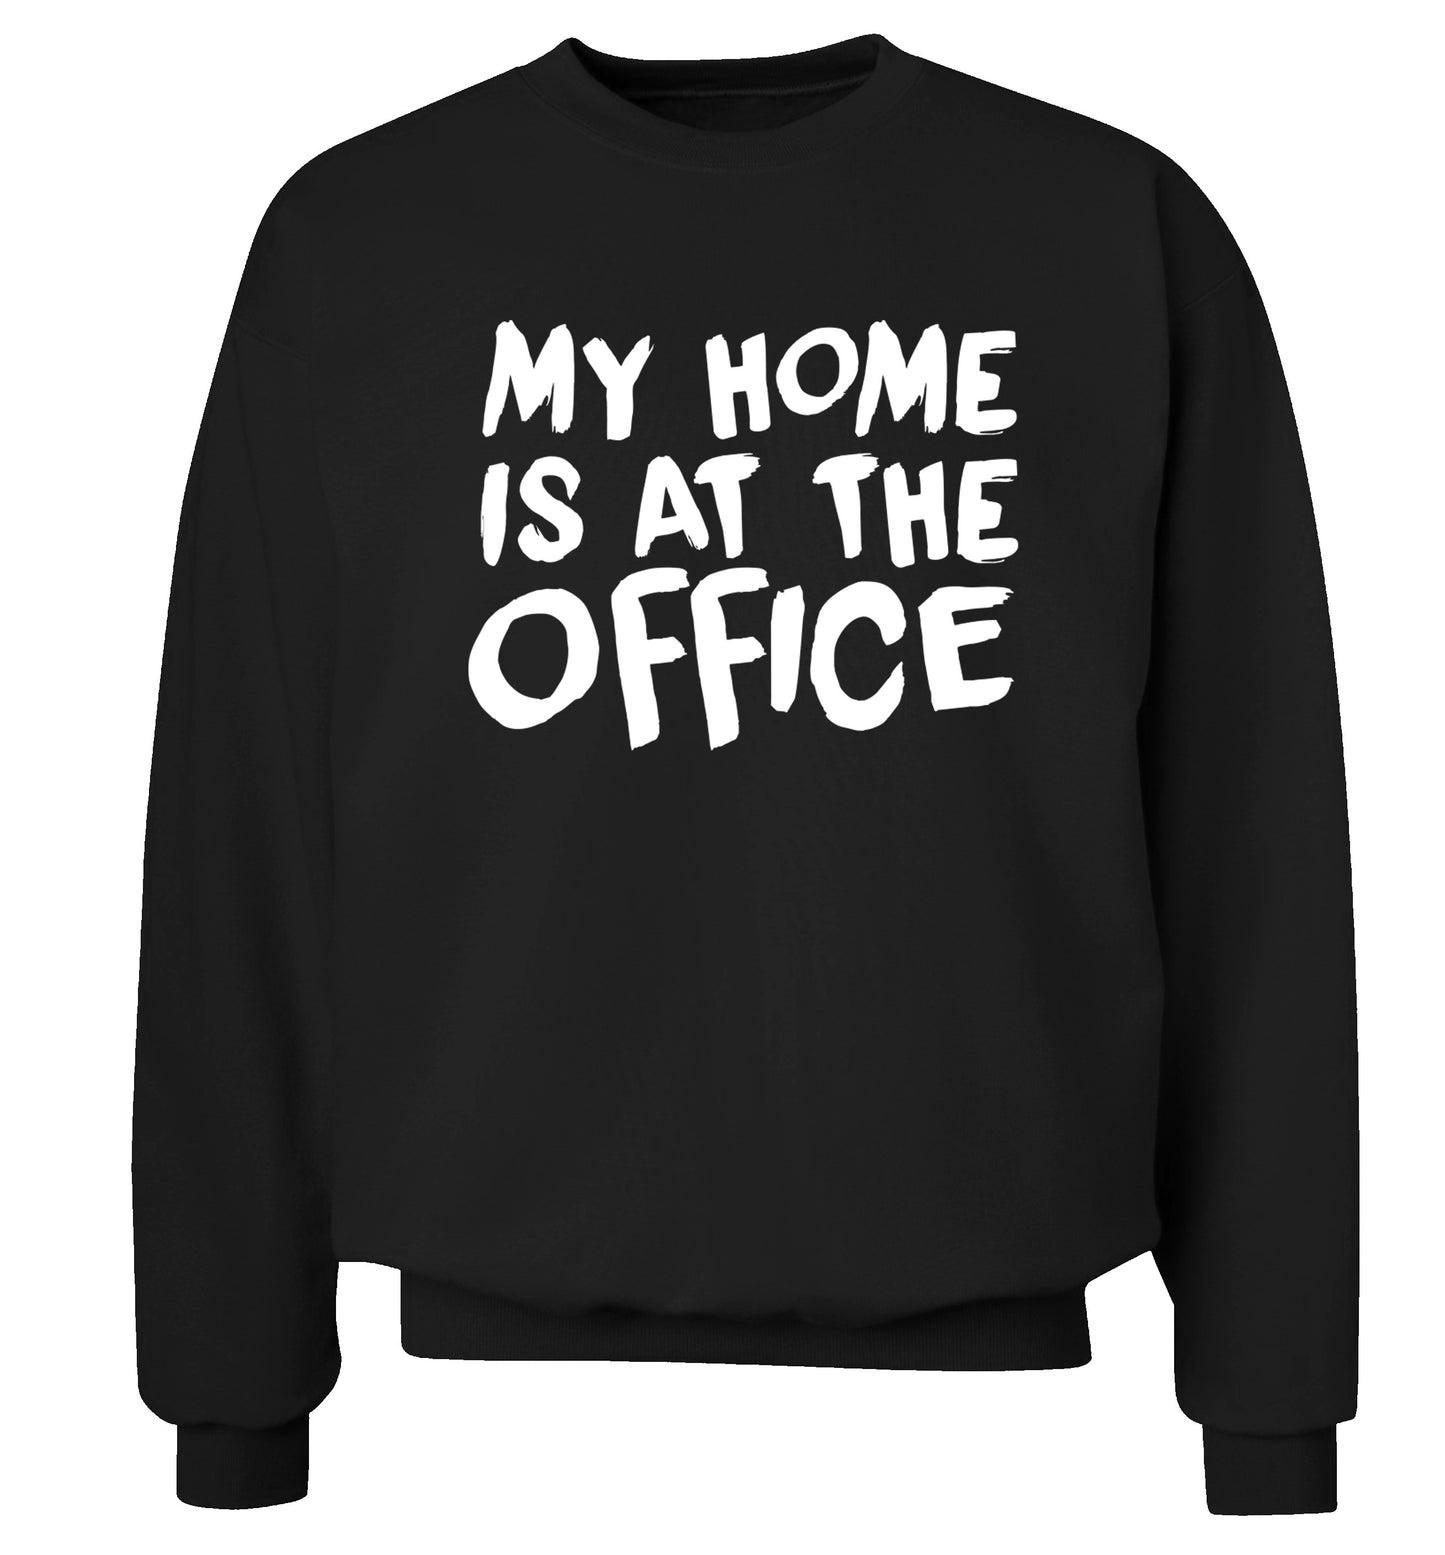 My home is at the office Adult's unisex black Sweater 2XL